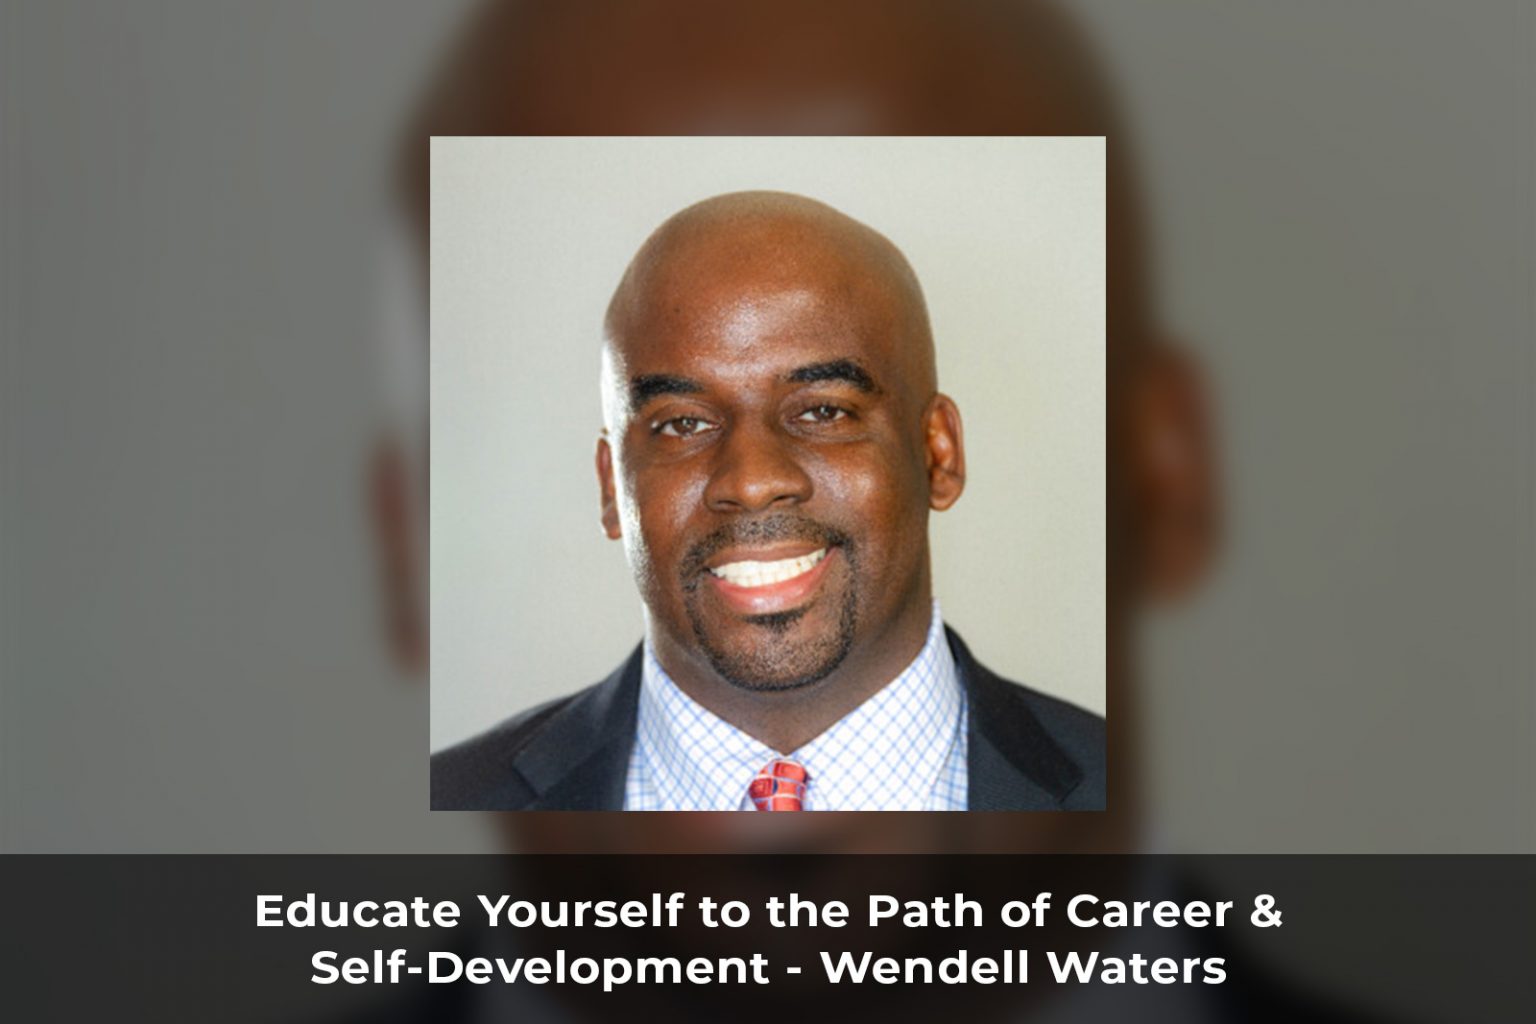 Educate Yourself to the Path of Career & Self-Development - Wendell Waters